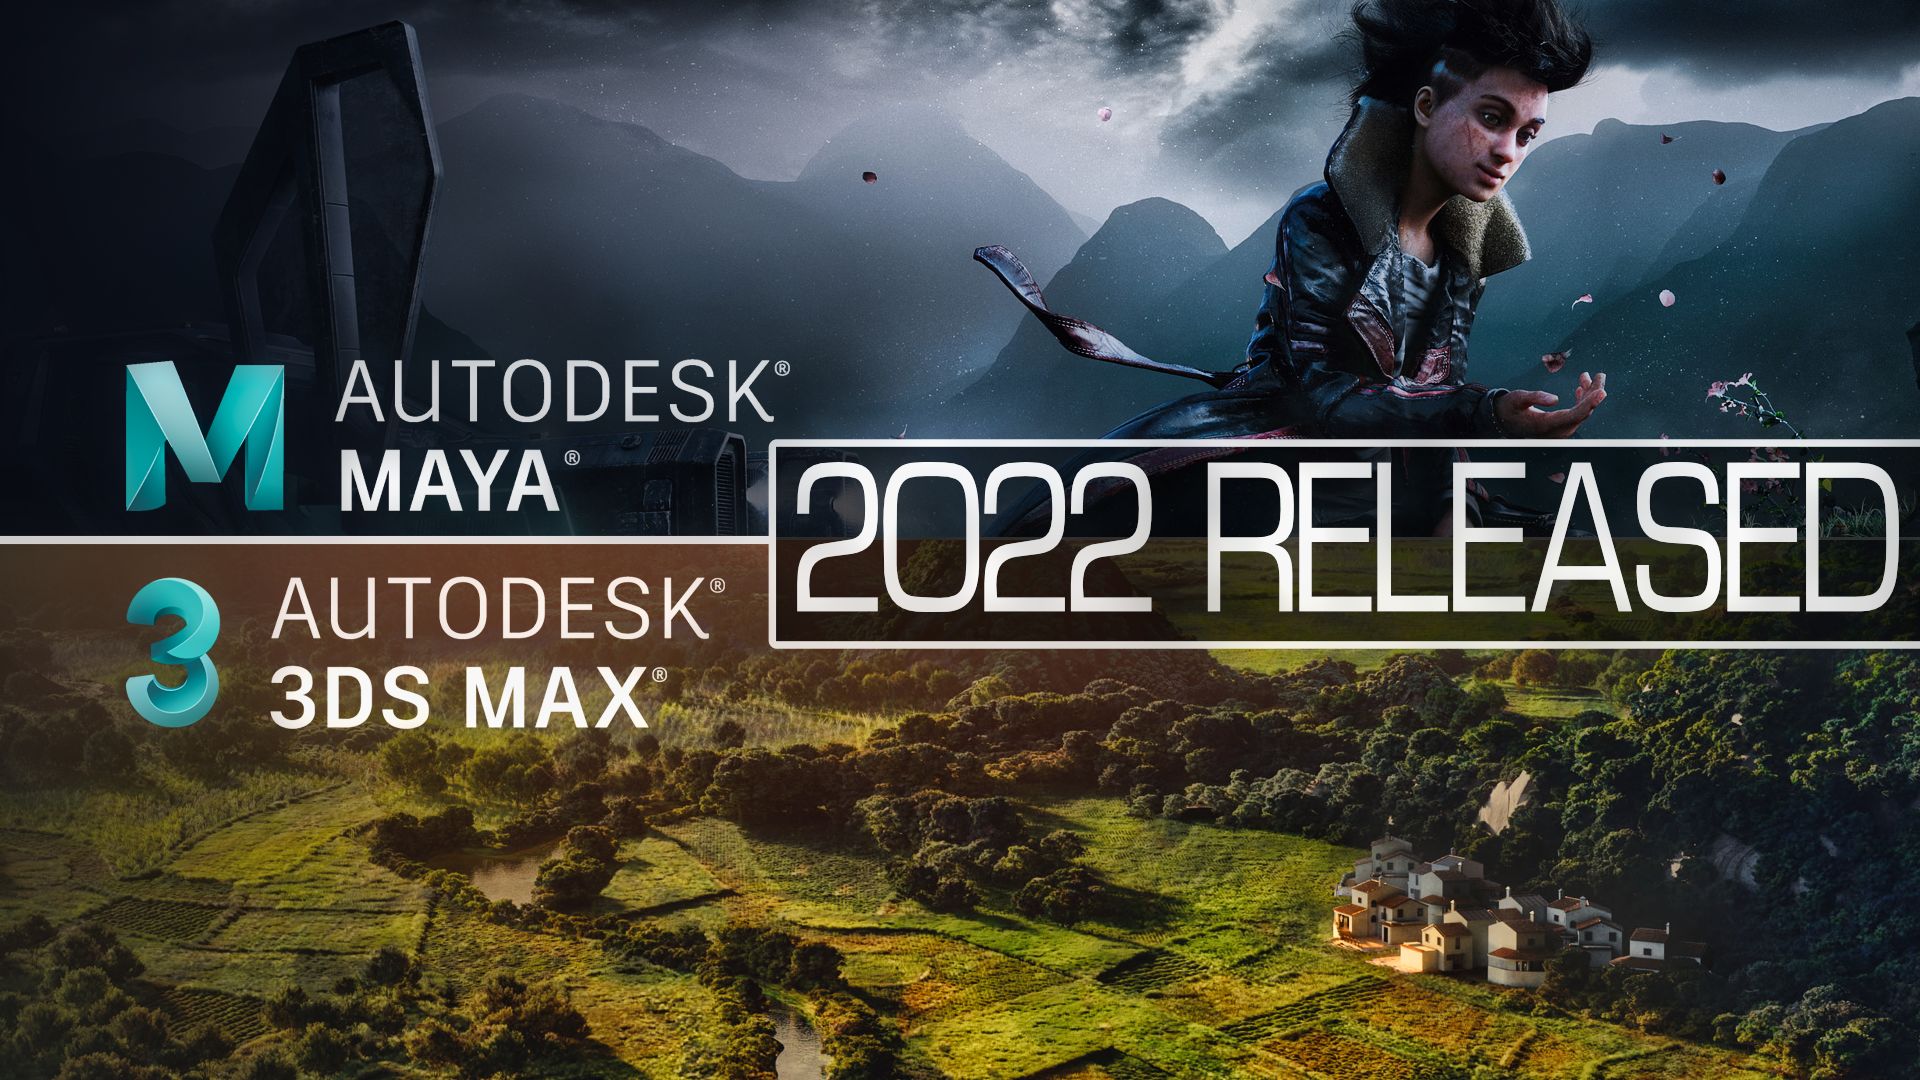 3ds max 2022 features